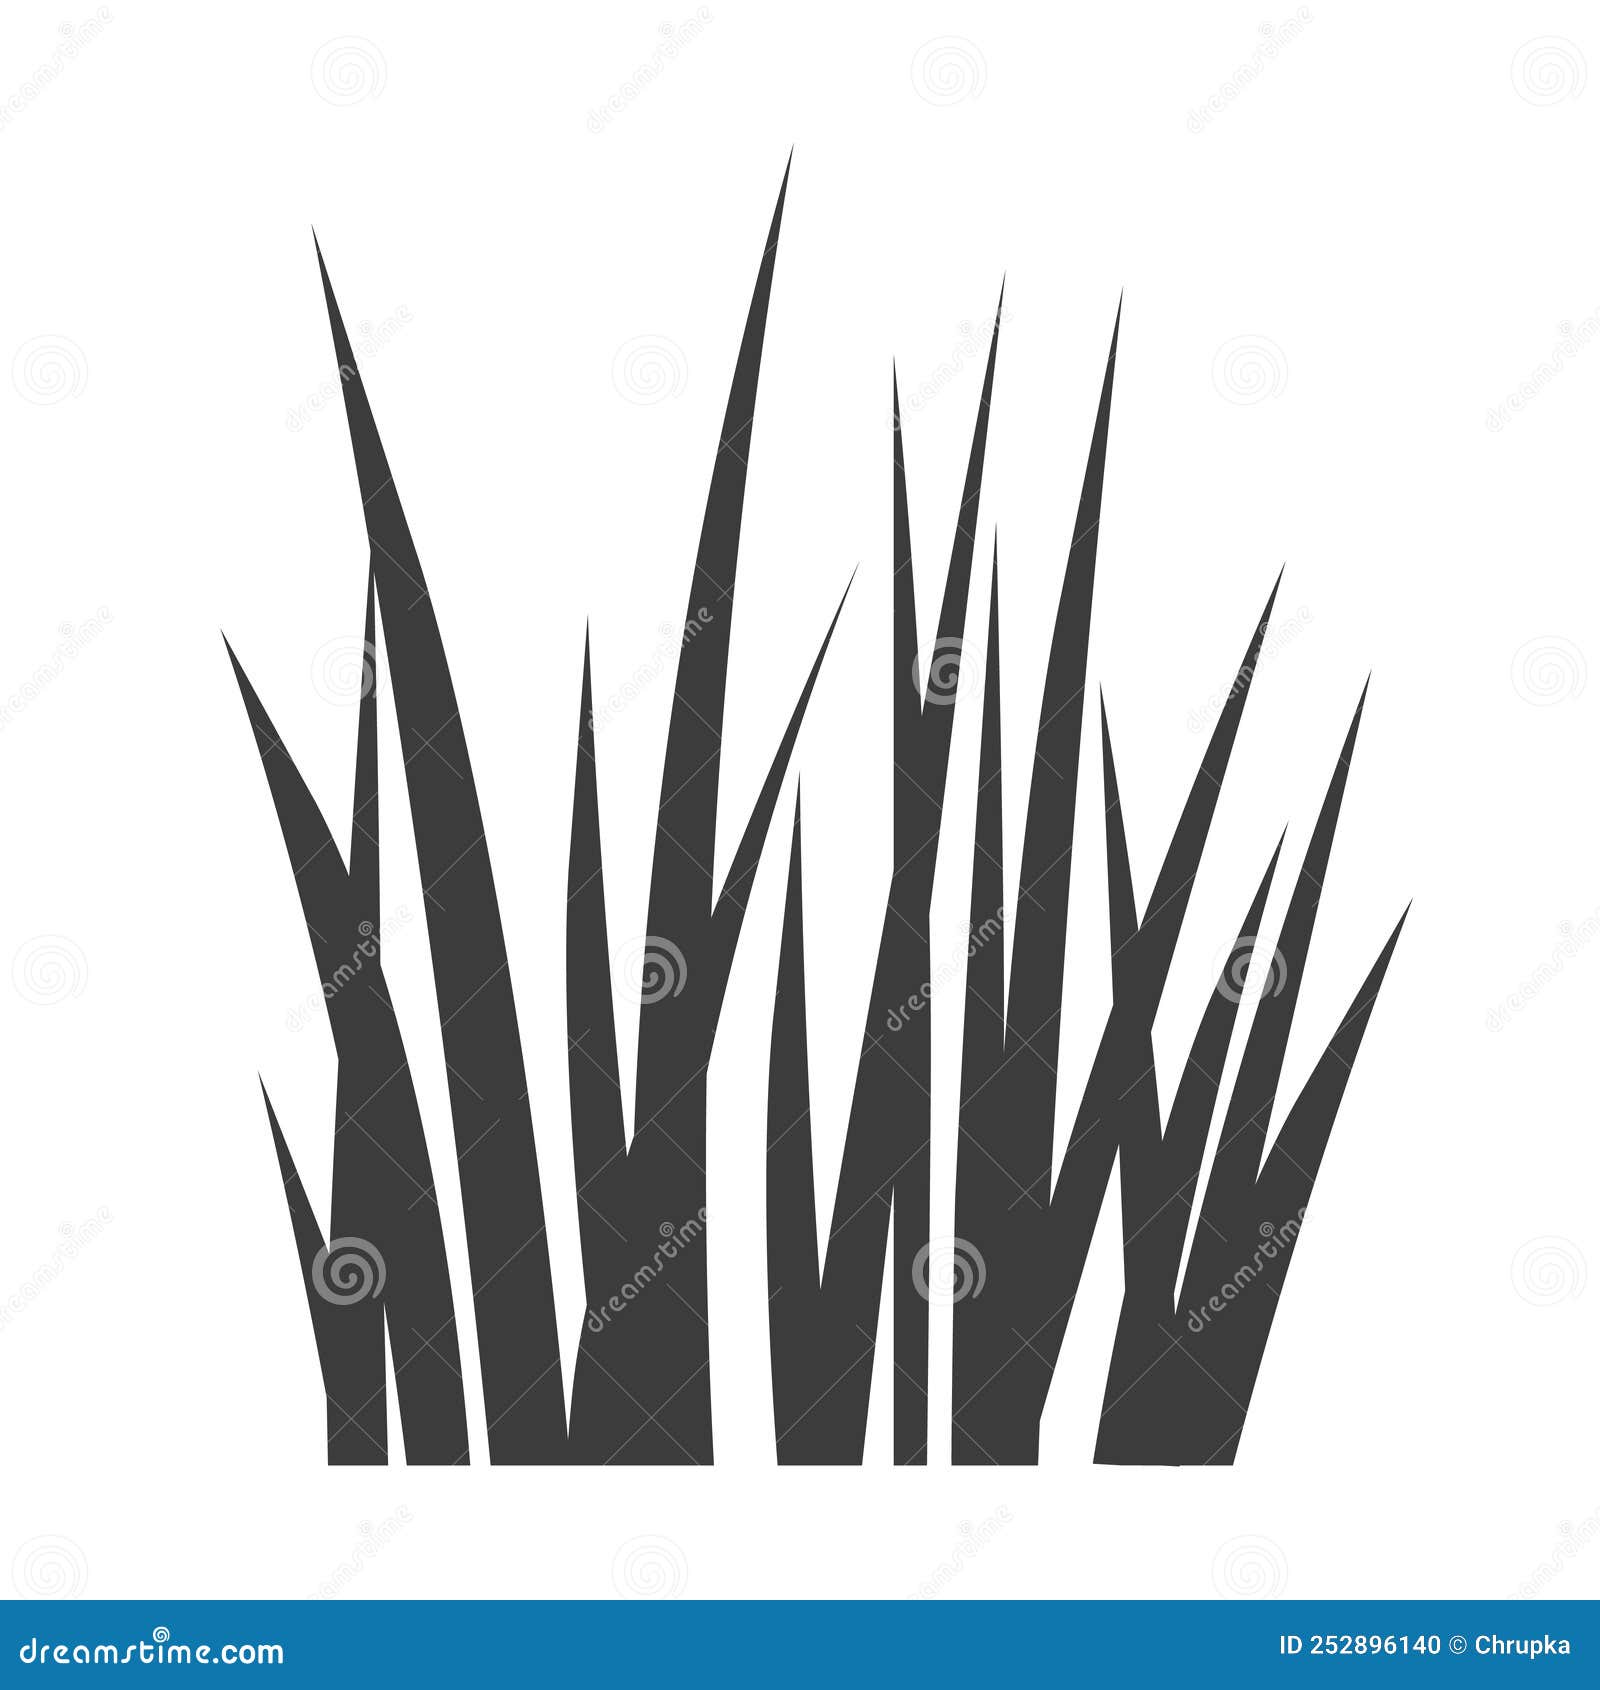 Blades of grass silhouette stock vector. Illustration of blades - 252896140